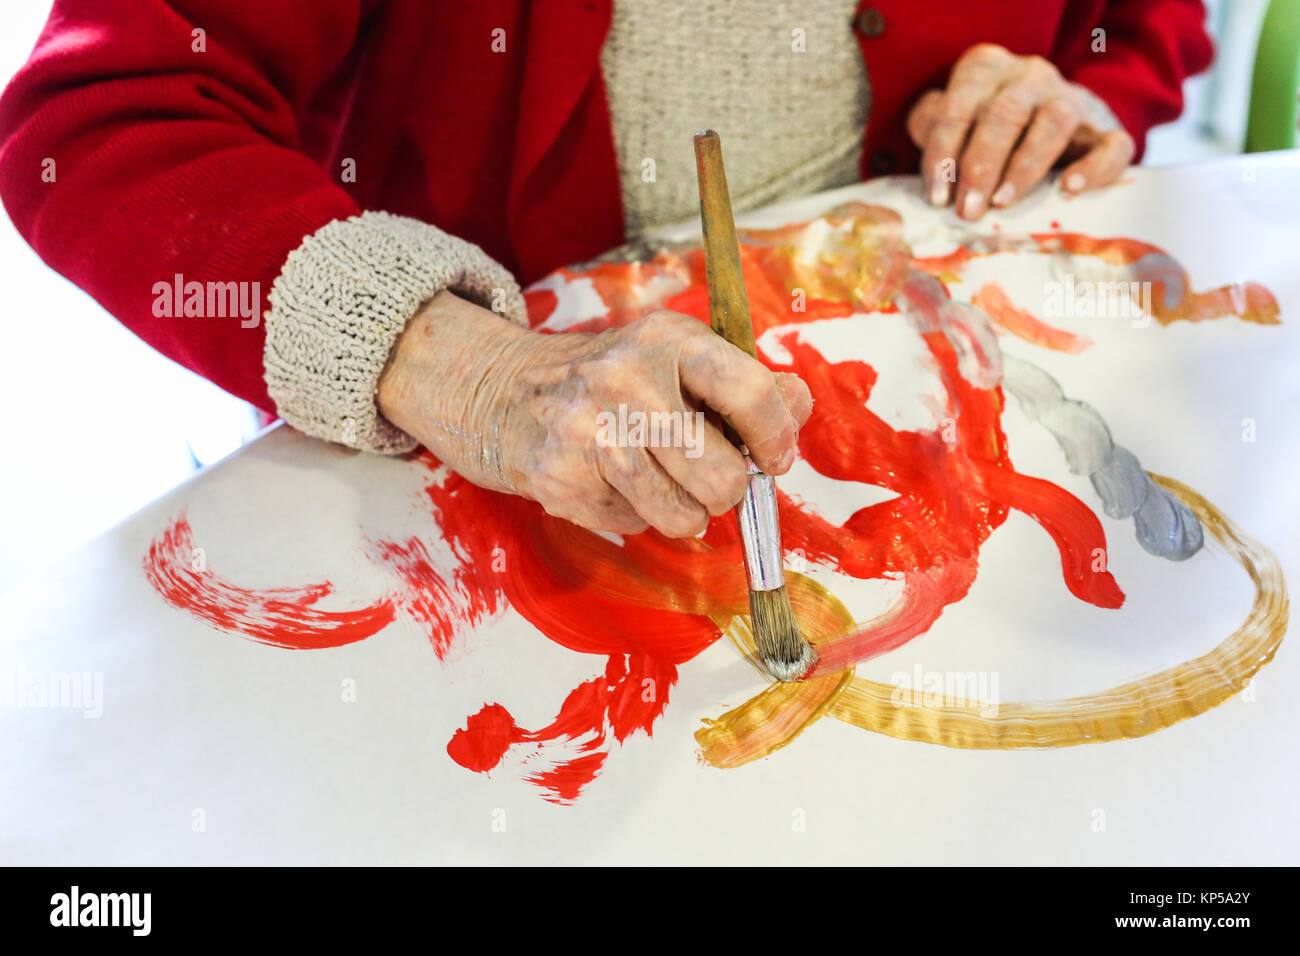 EHPAD specialized in the care of the elderly suffering from Alzheimer's disease, Workshop with an art therapist, Center for psychogeriatric care, Fran Stock Photo